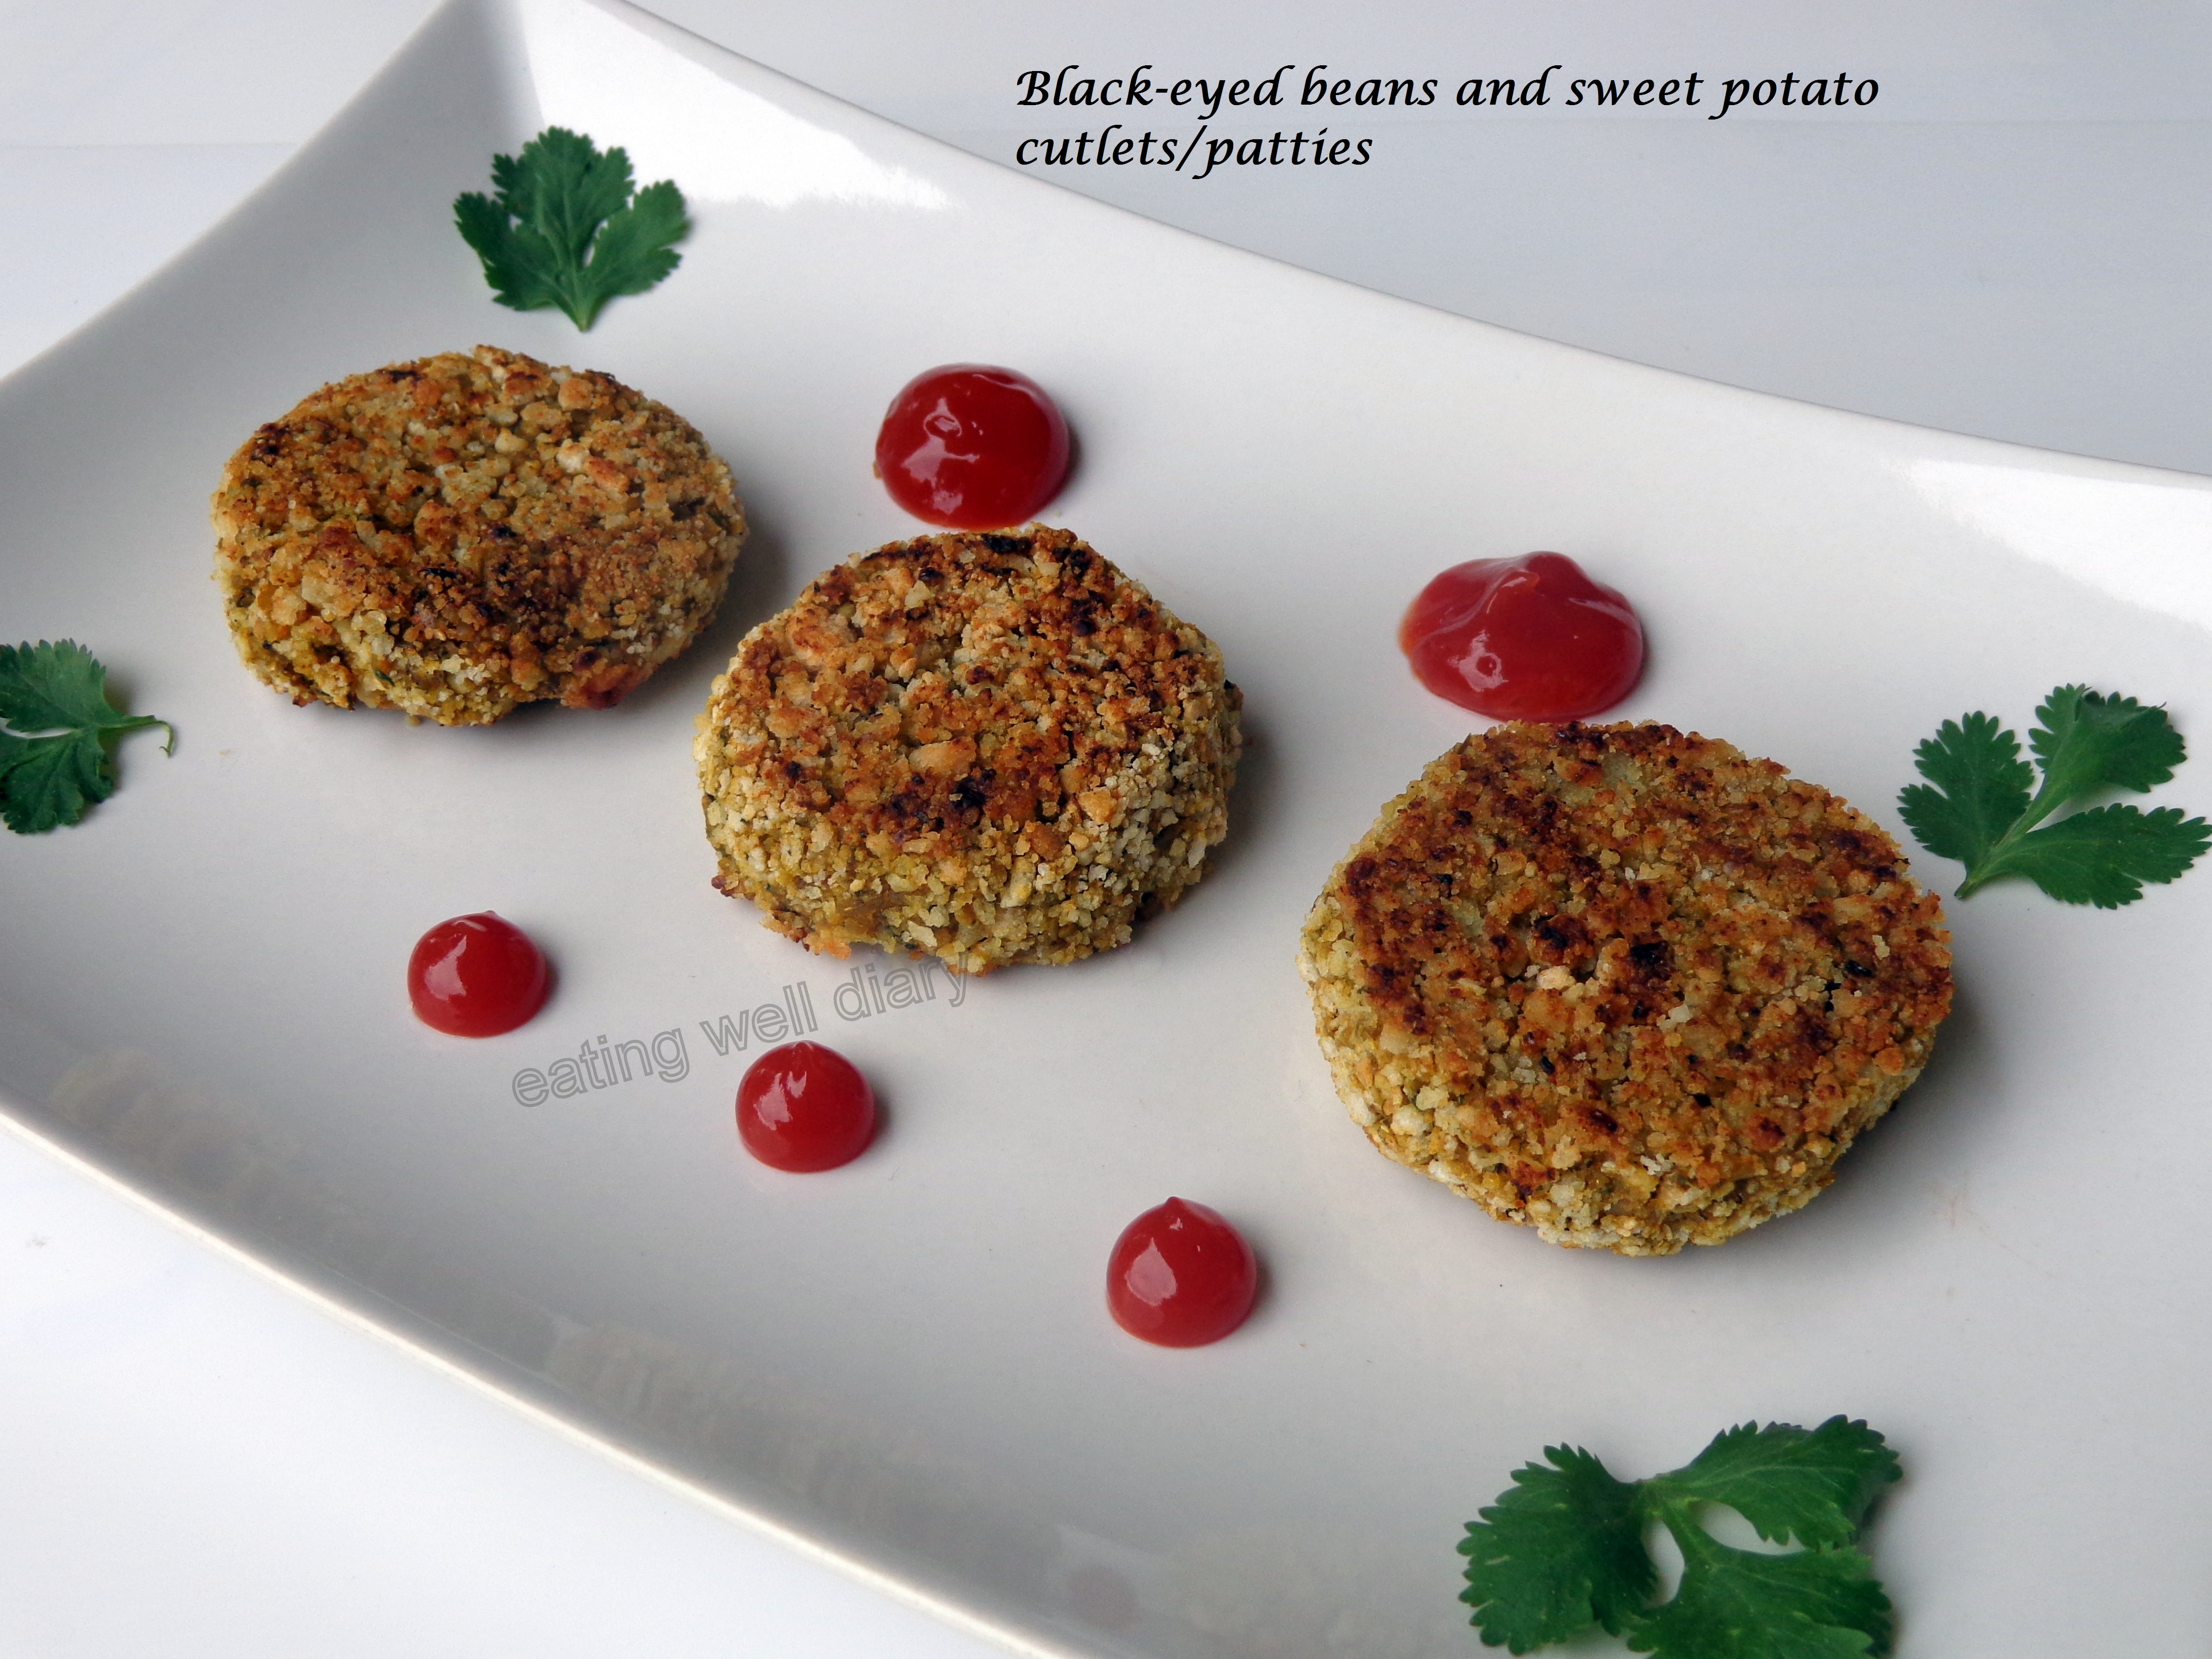 Cutlets / patties with sprouted black-eye bean and sweet potato (vegan, gluten-free)